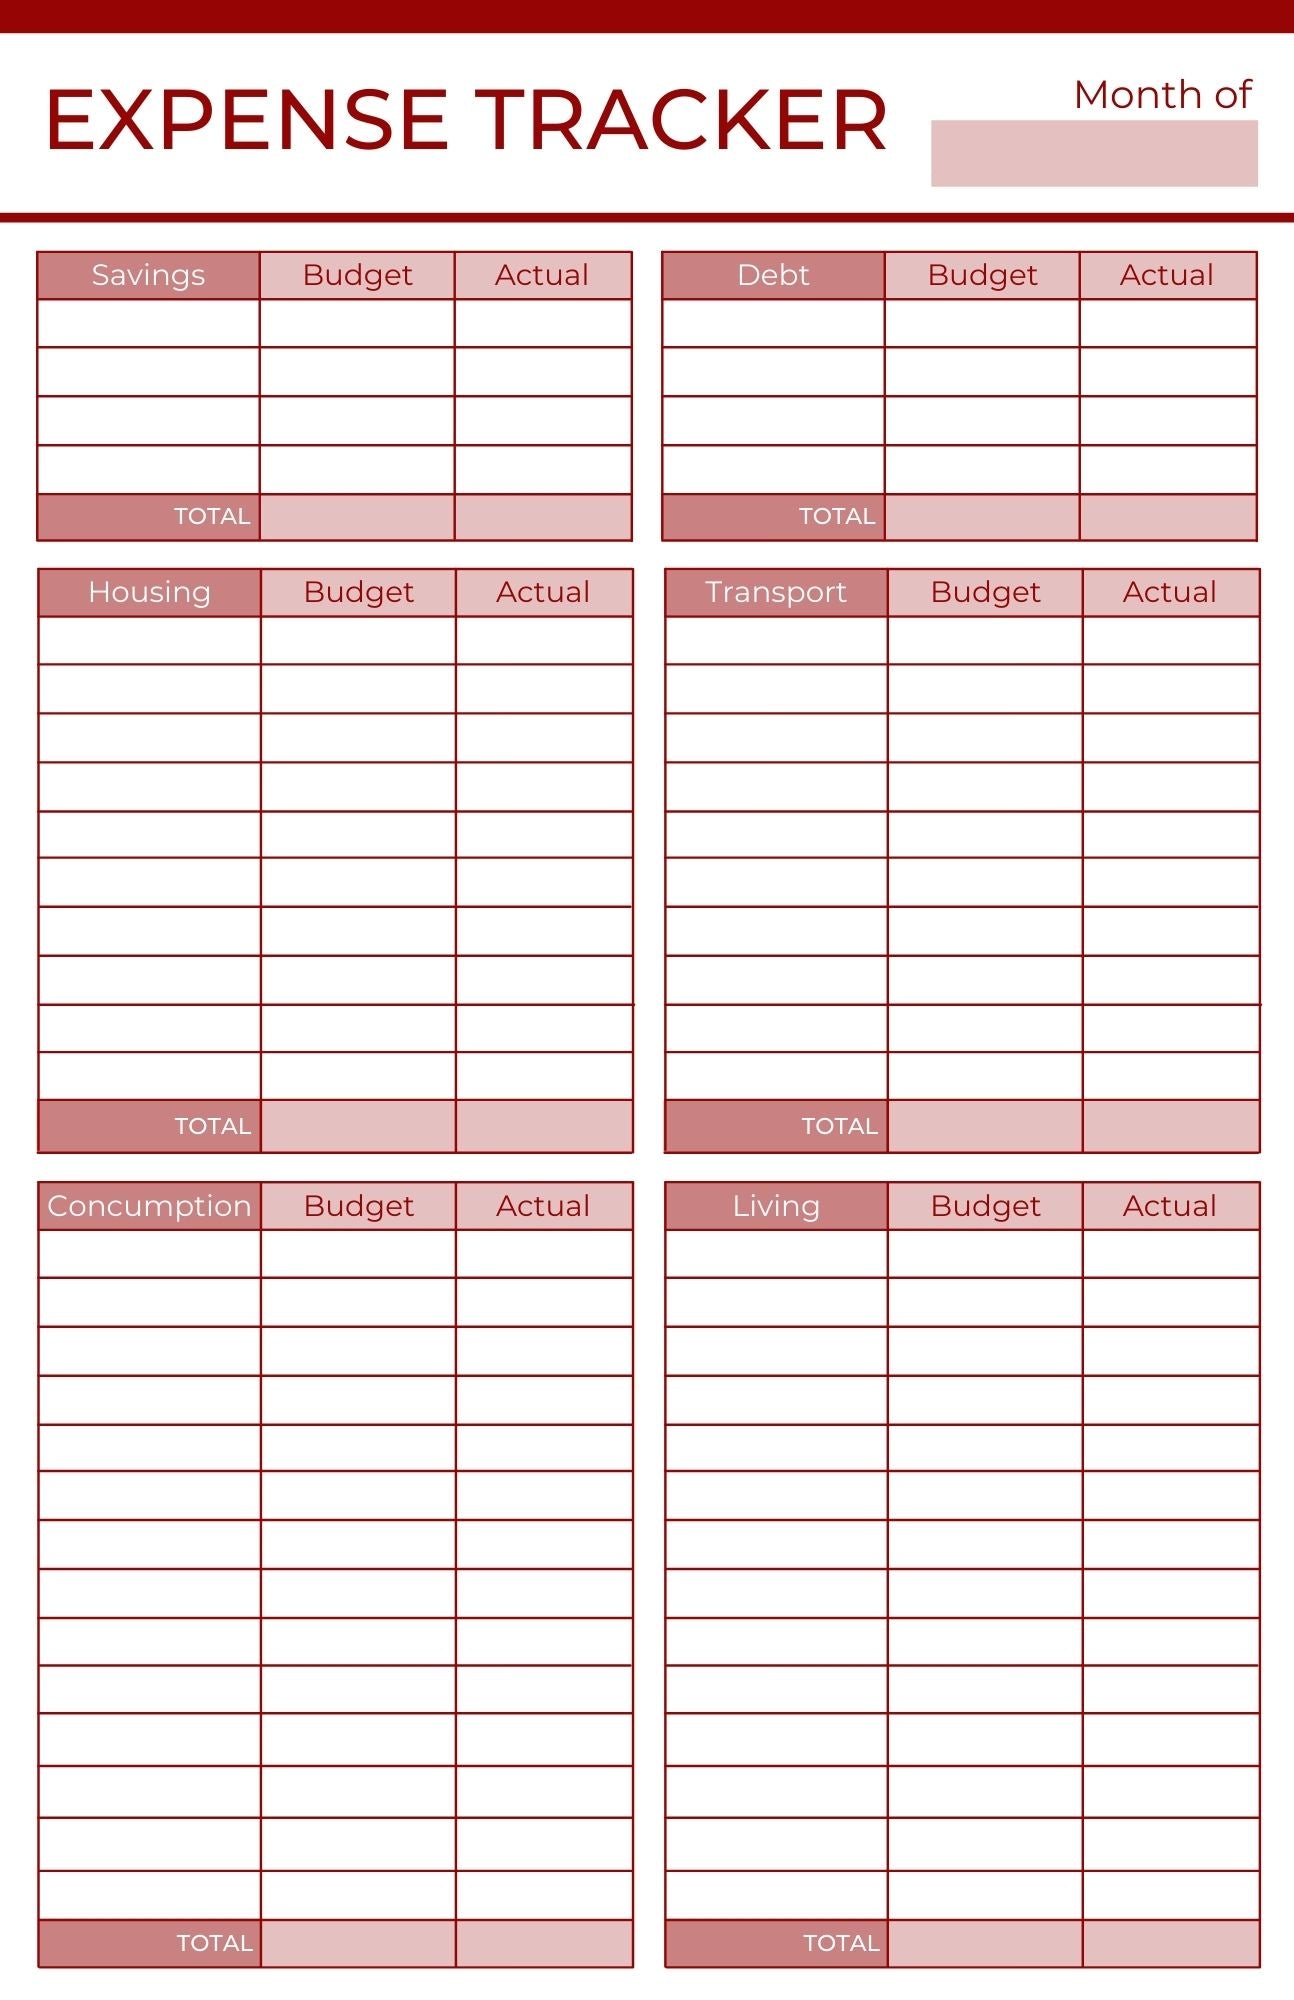 expense business tracker printable